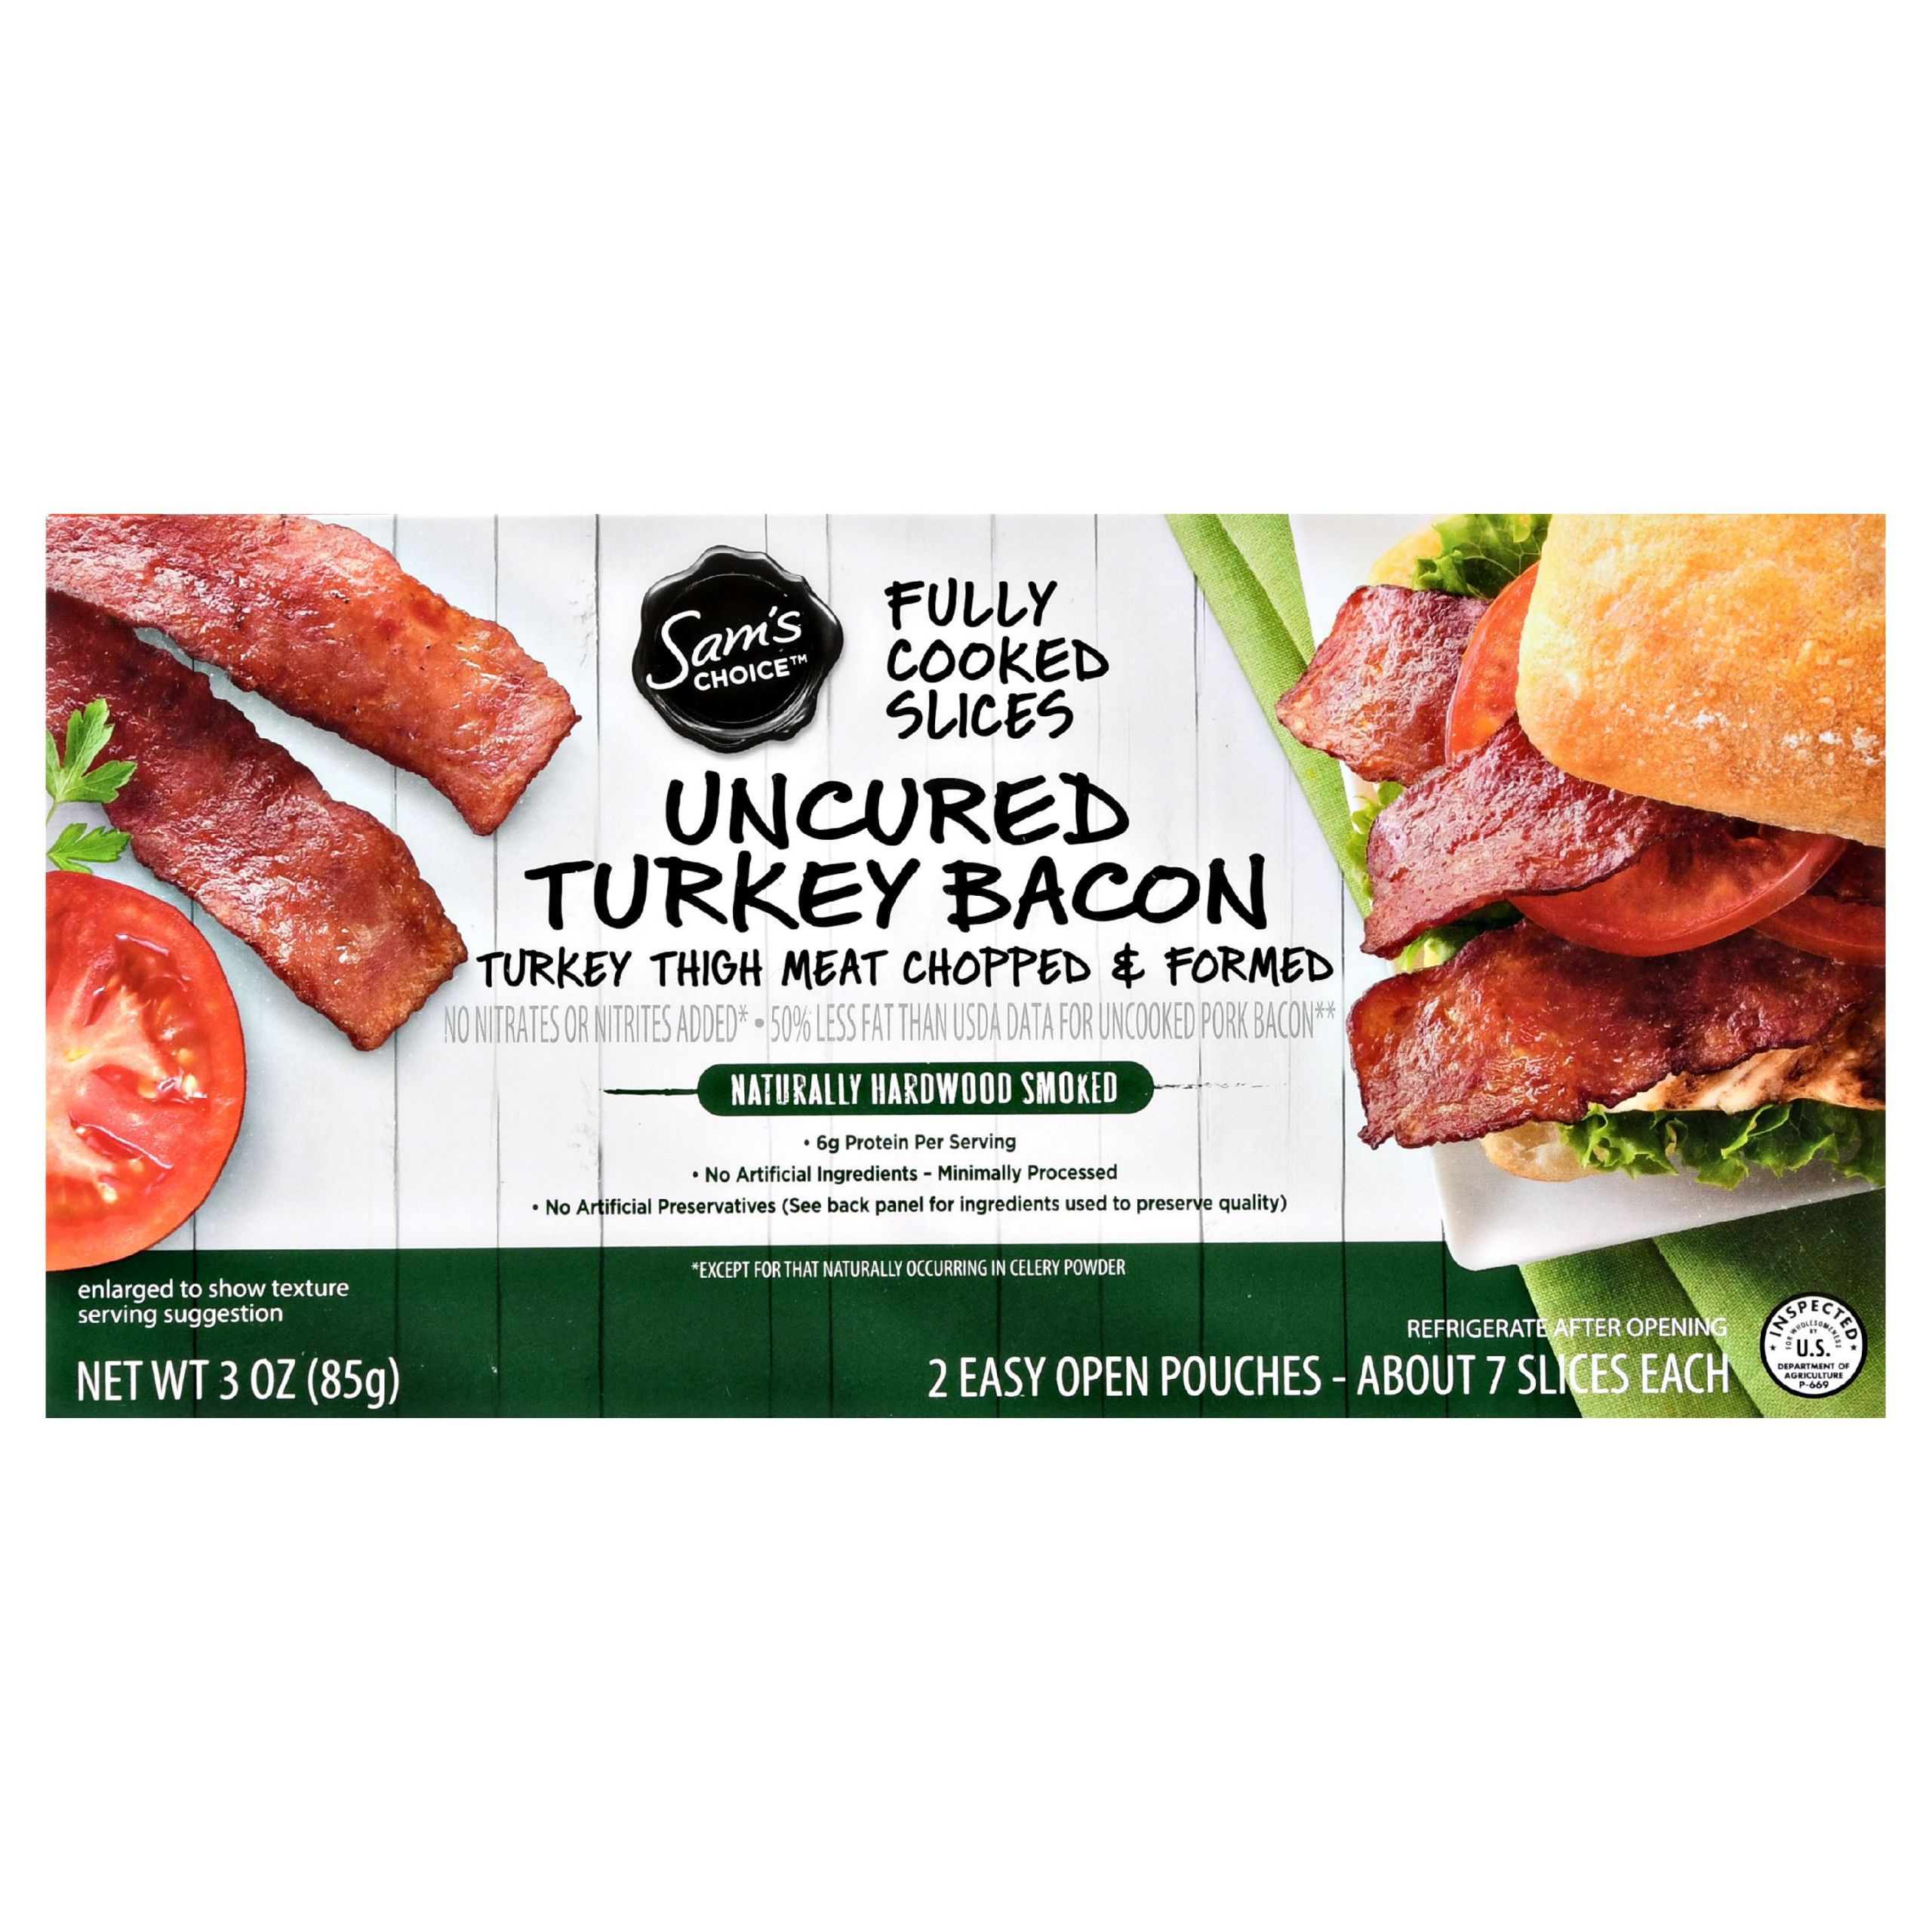 Pre Cooked Thanksgiving Dinner Walmart 2020
 Sam s Choice Fully Cooked Uncured Turkey Bacon 3 Oz